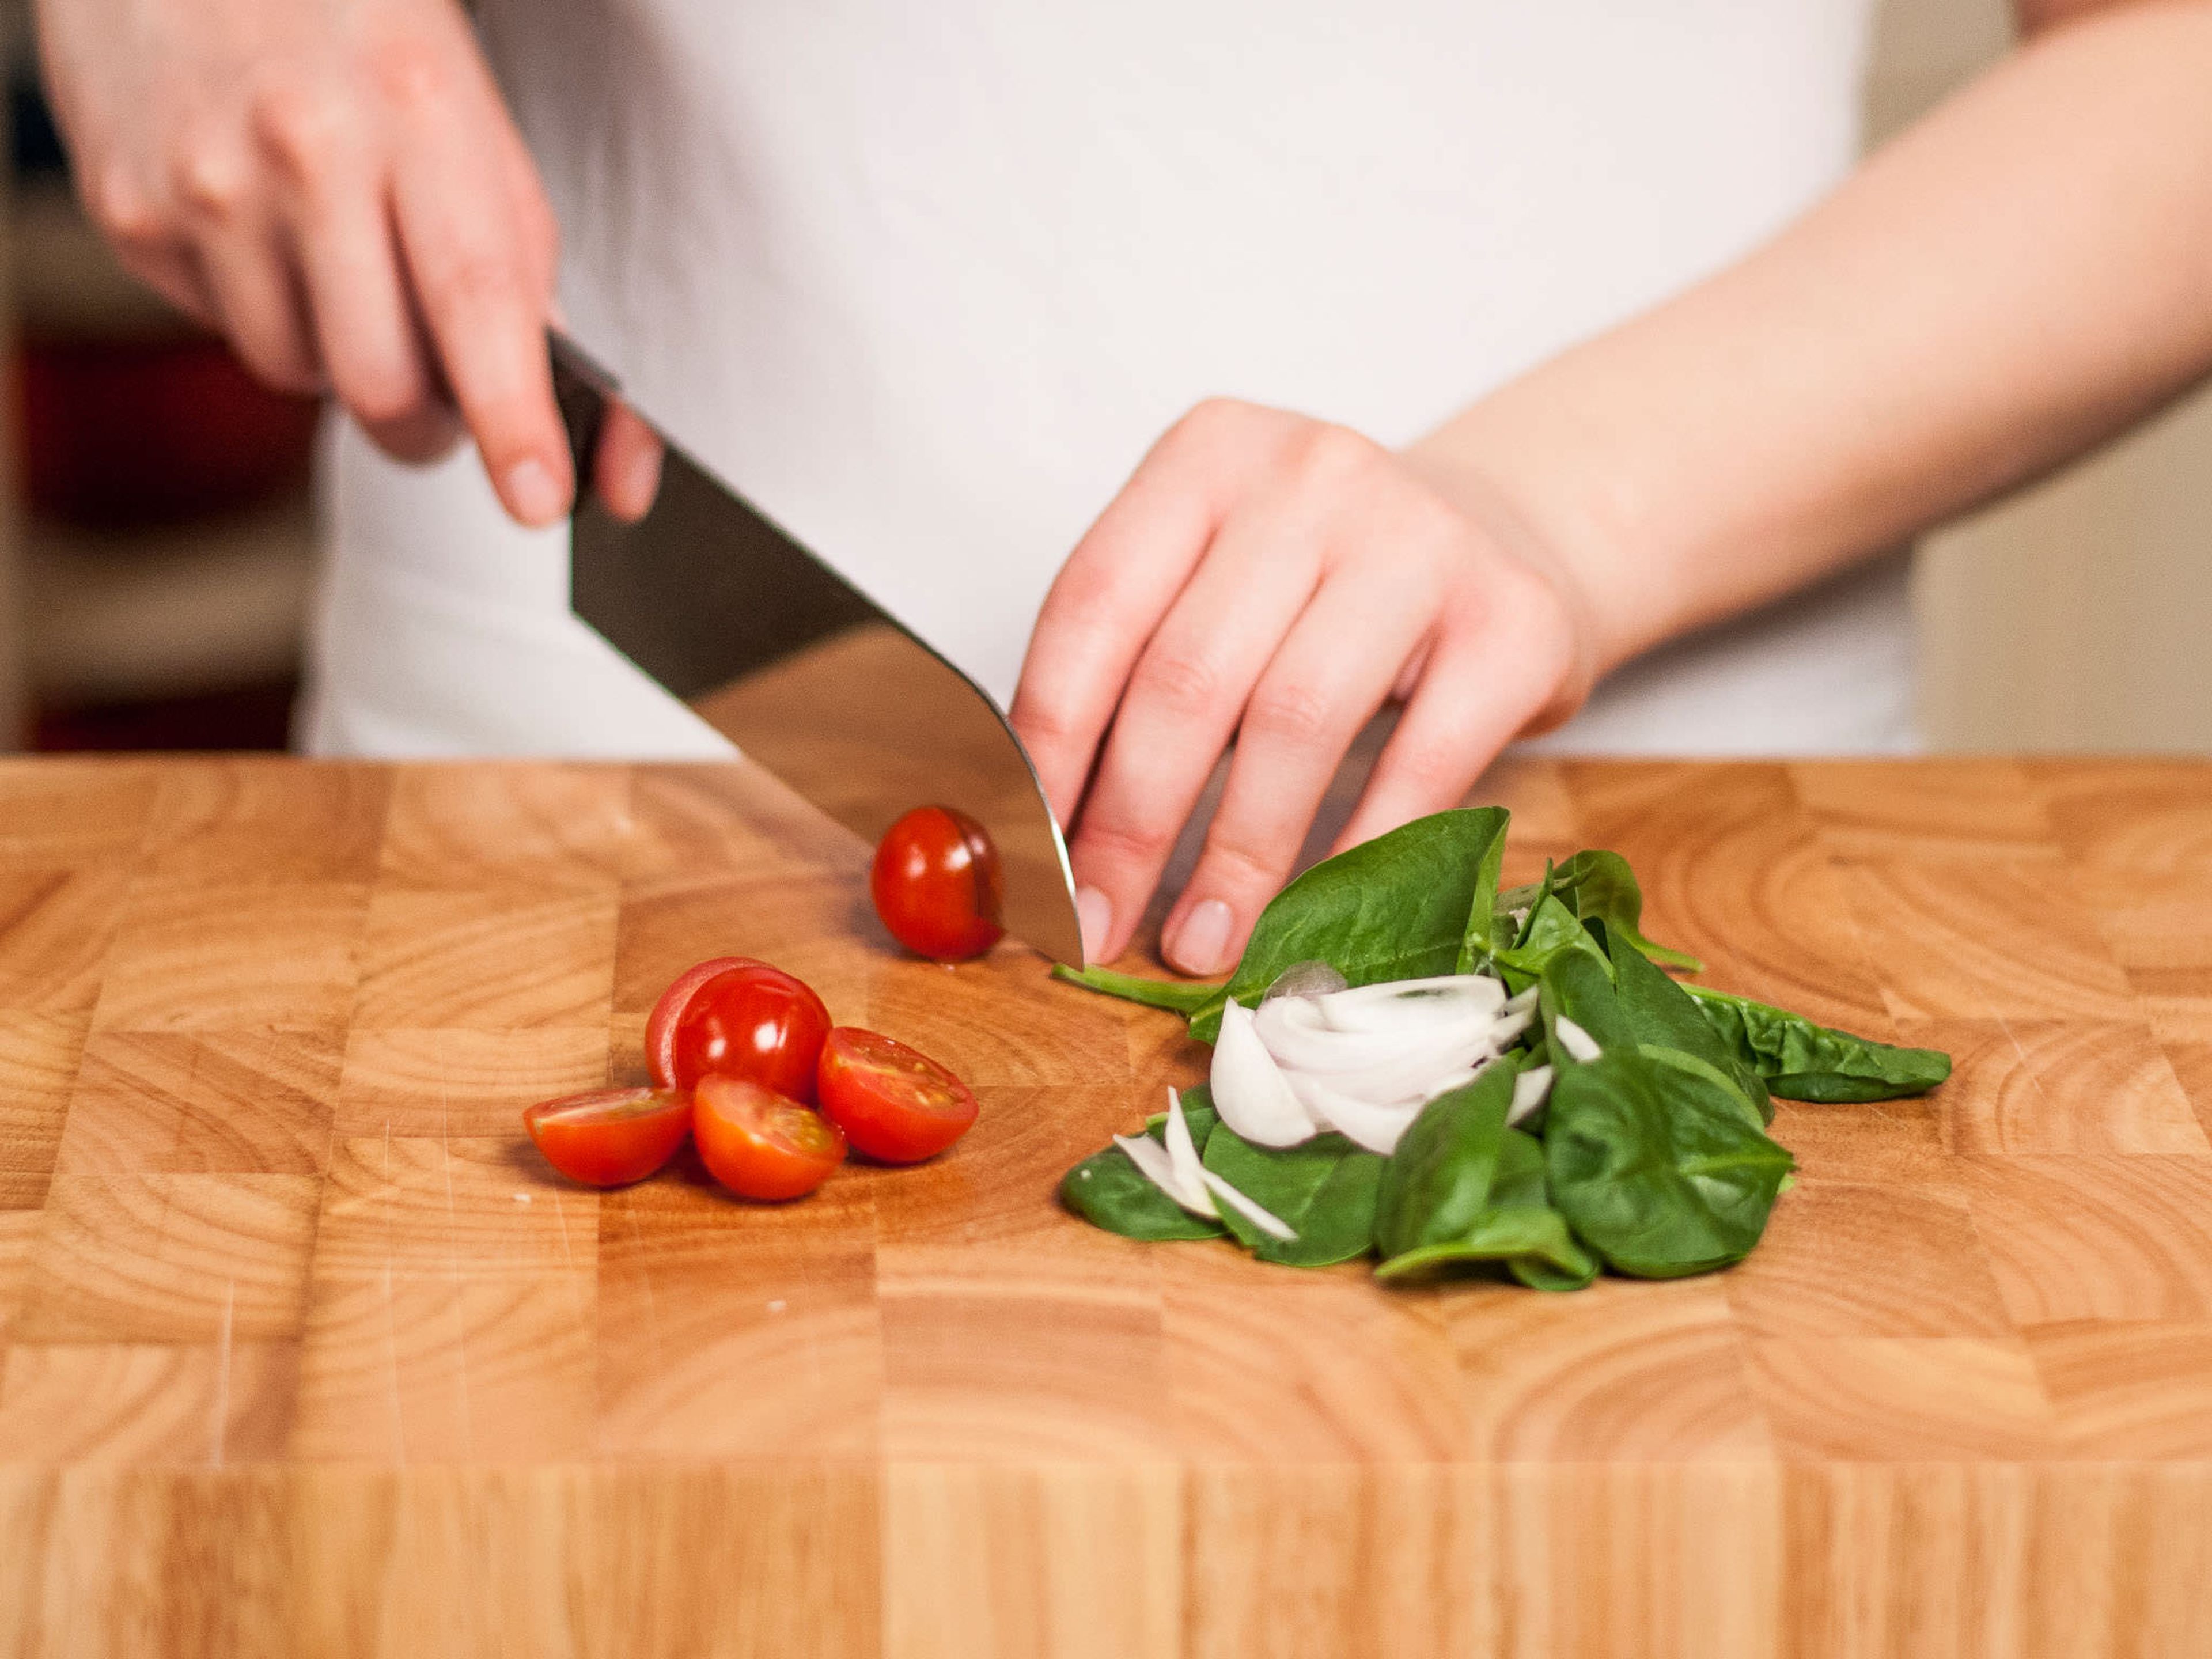 Clean spinach. Cut onion into thin strips, finely chop garlic, and halve cherry tomatoes.